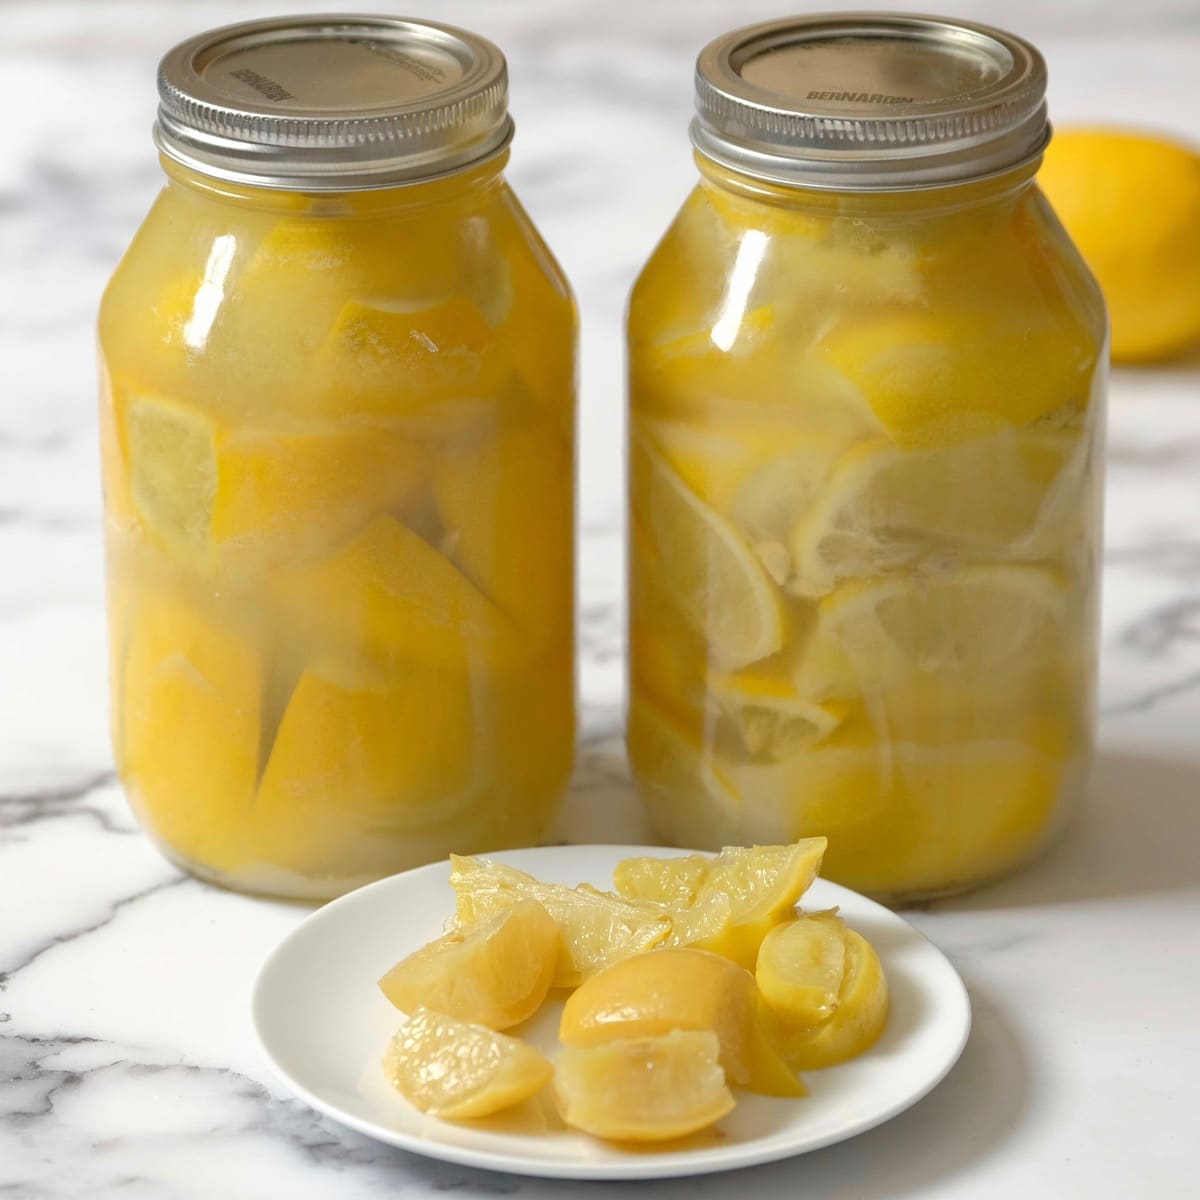 Dish of Preserved Lemon Quarters on marble counter, two jars of lemons in background.